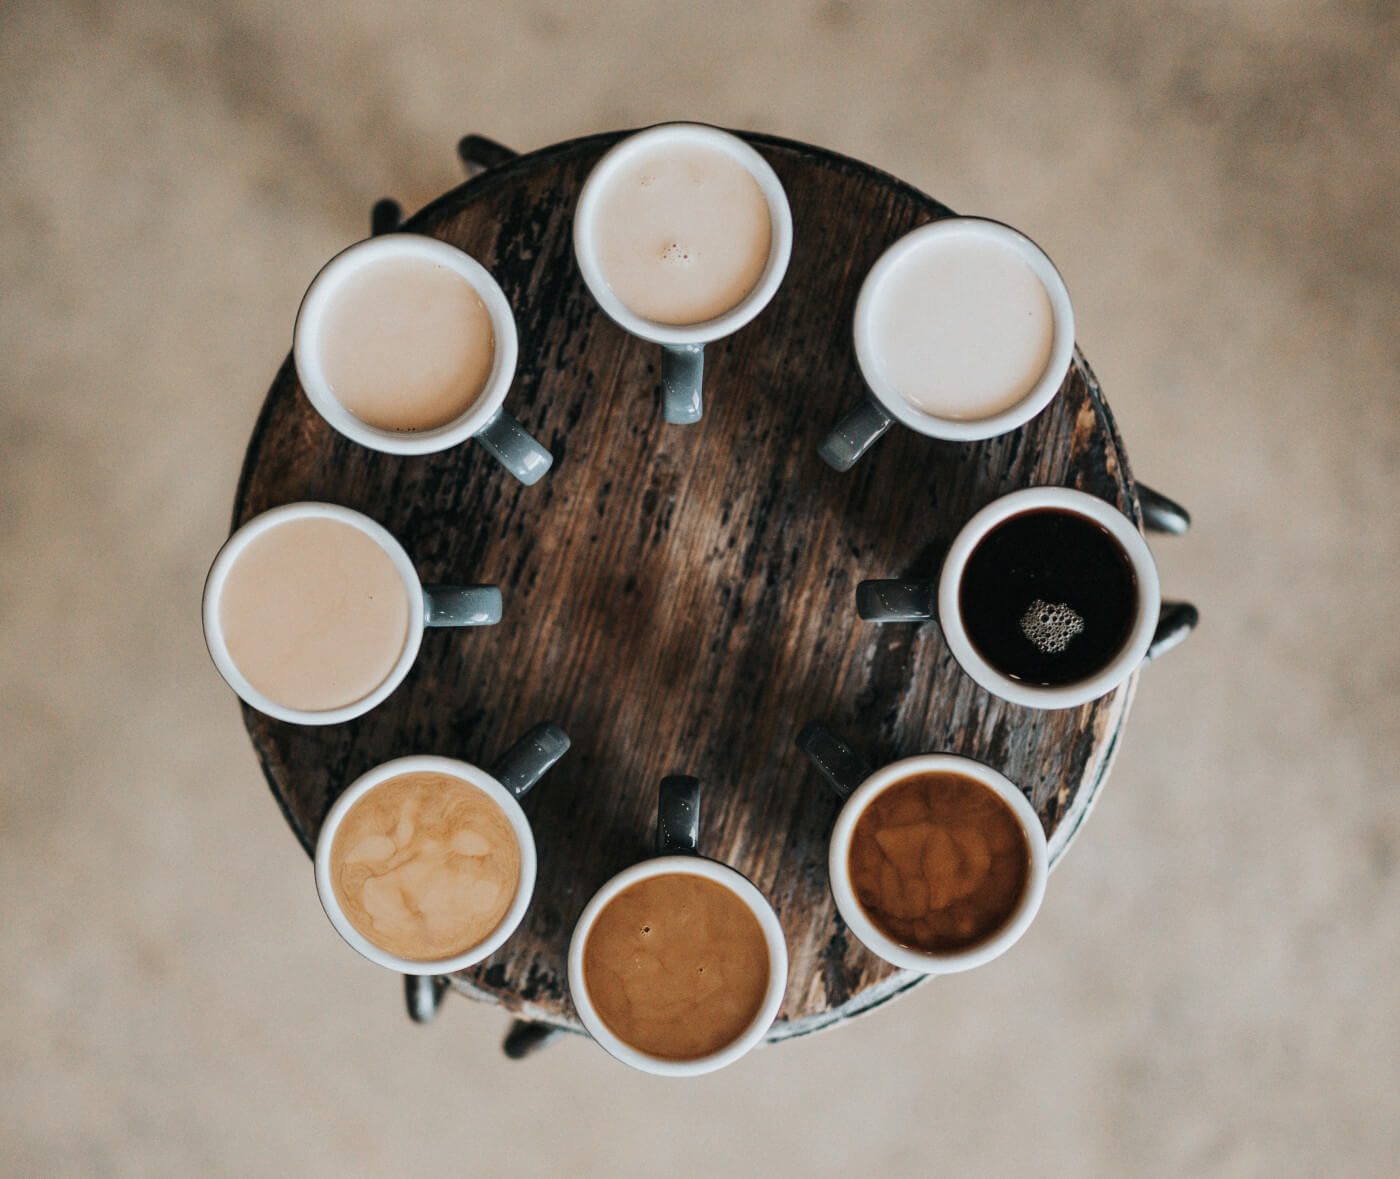 https://dropinblog.net/34243820/files/featured/different_types_of_coffee.jpg